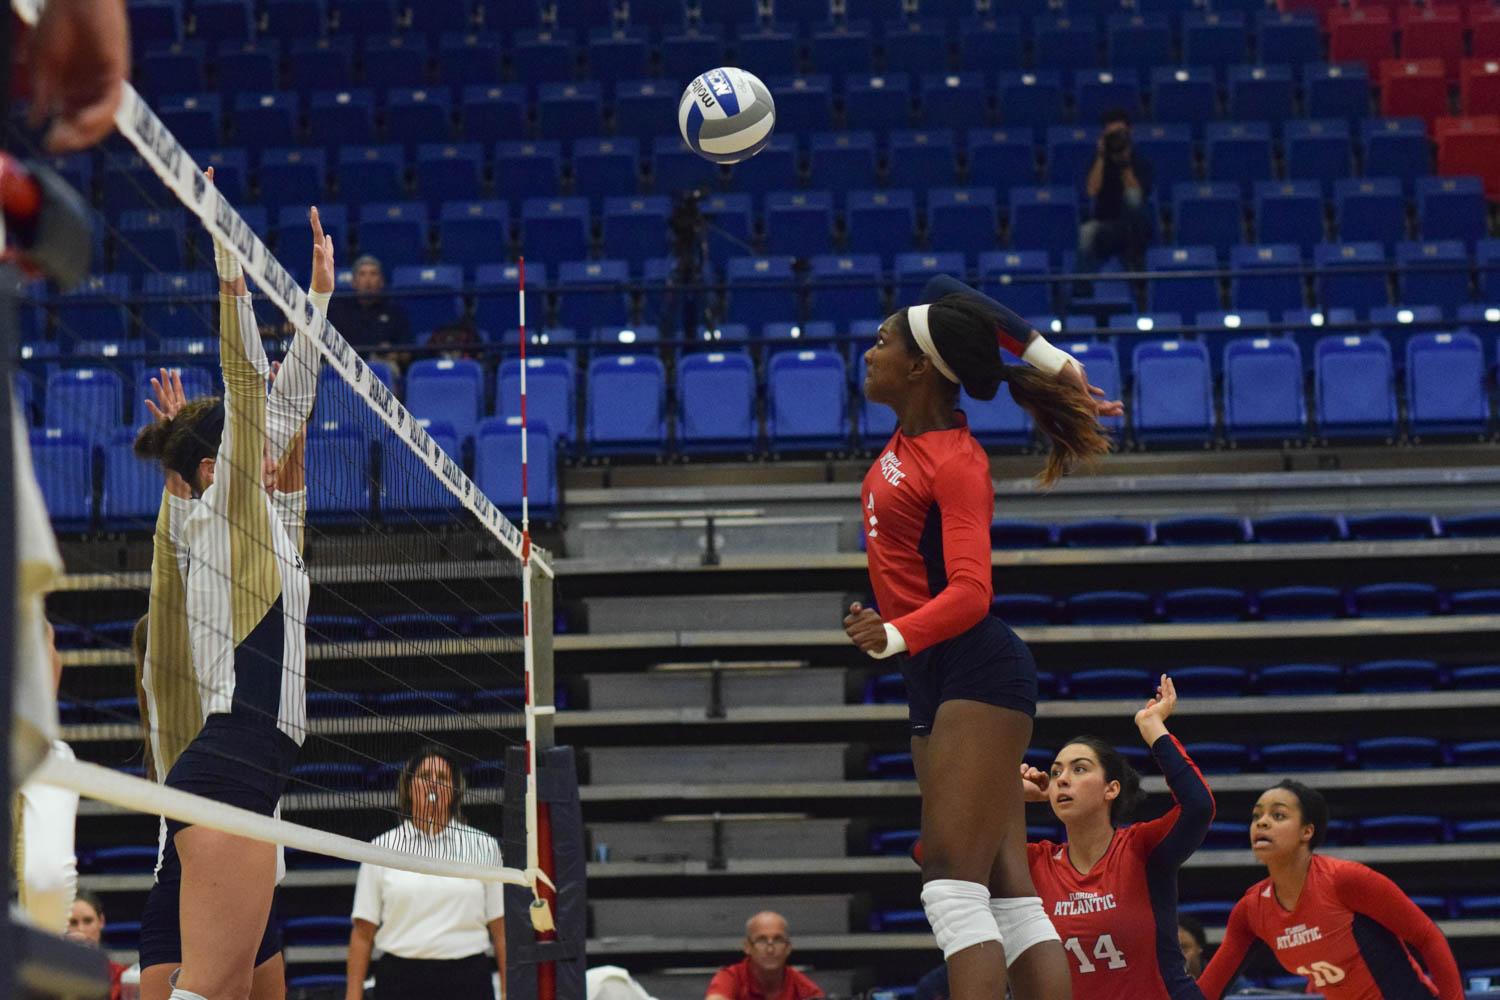 Senior middle blocker Brittany Brown spikes the ball past two Eagles defenders during the first set of their match during the FAU Invitational tournament. Ryan Lynch | Sports Editor 